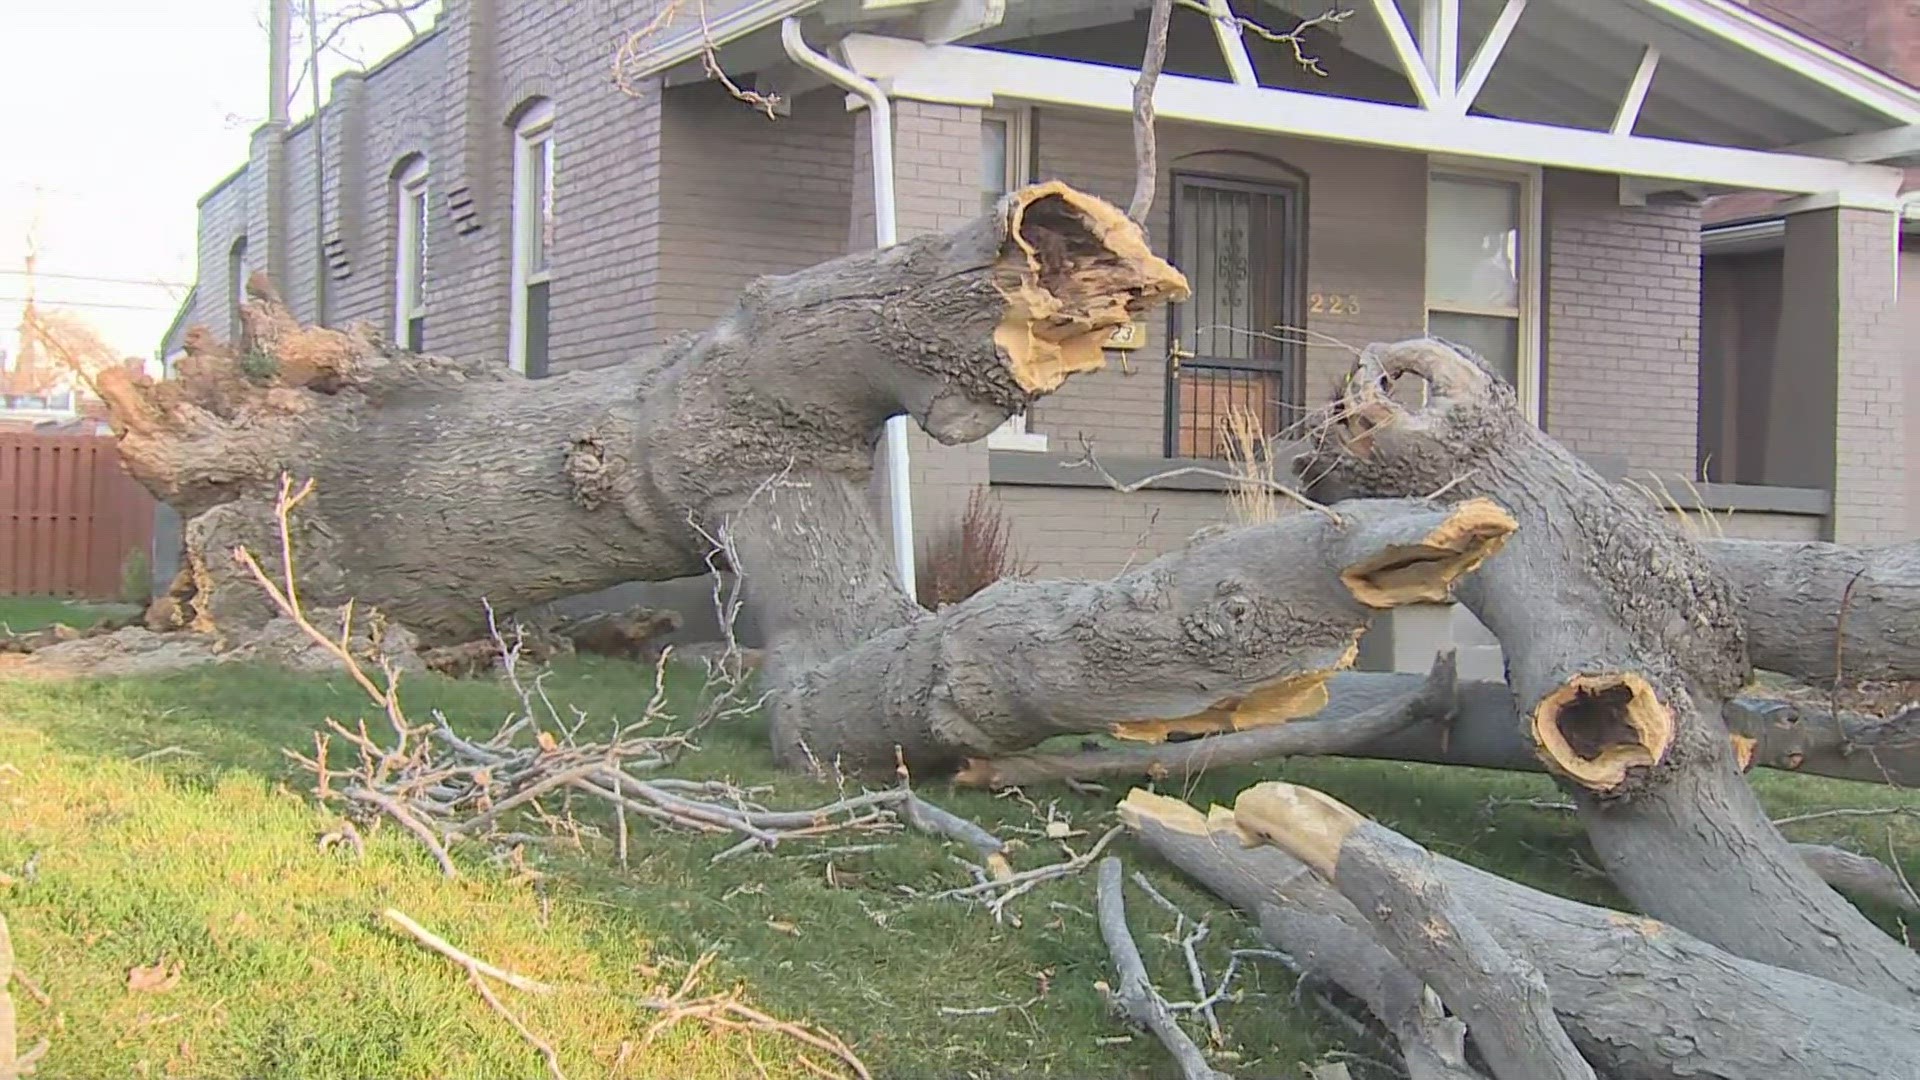 Damage from high winds over the weekend extended from Denver into the surrounding metro area and foothills.